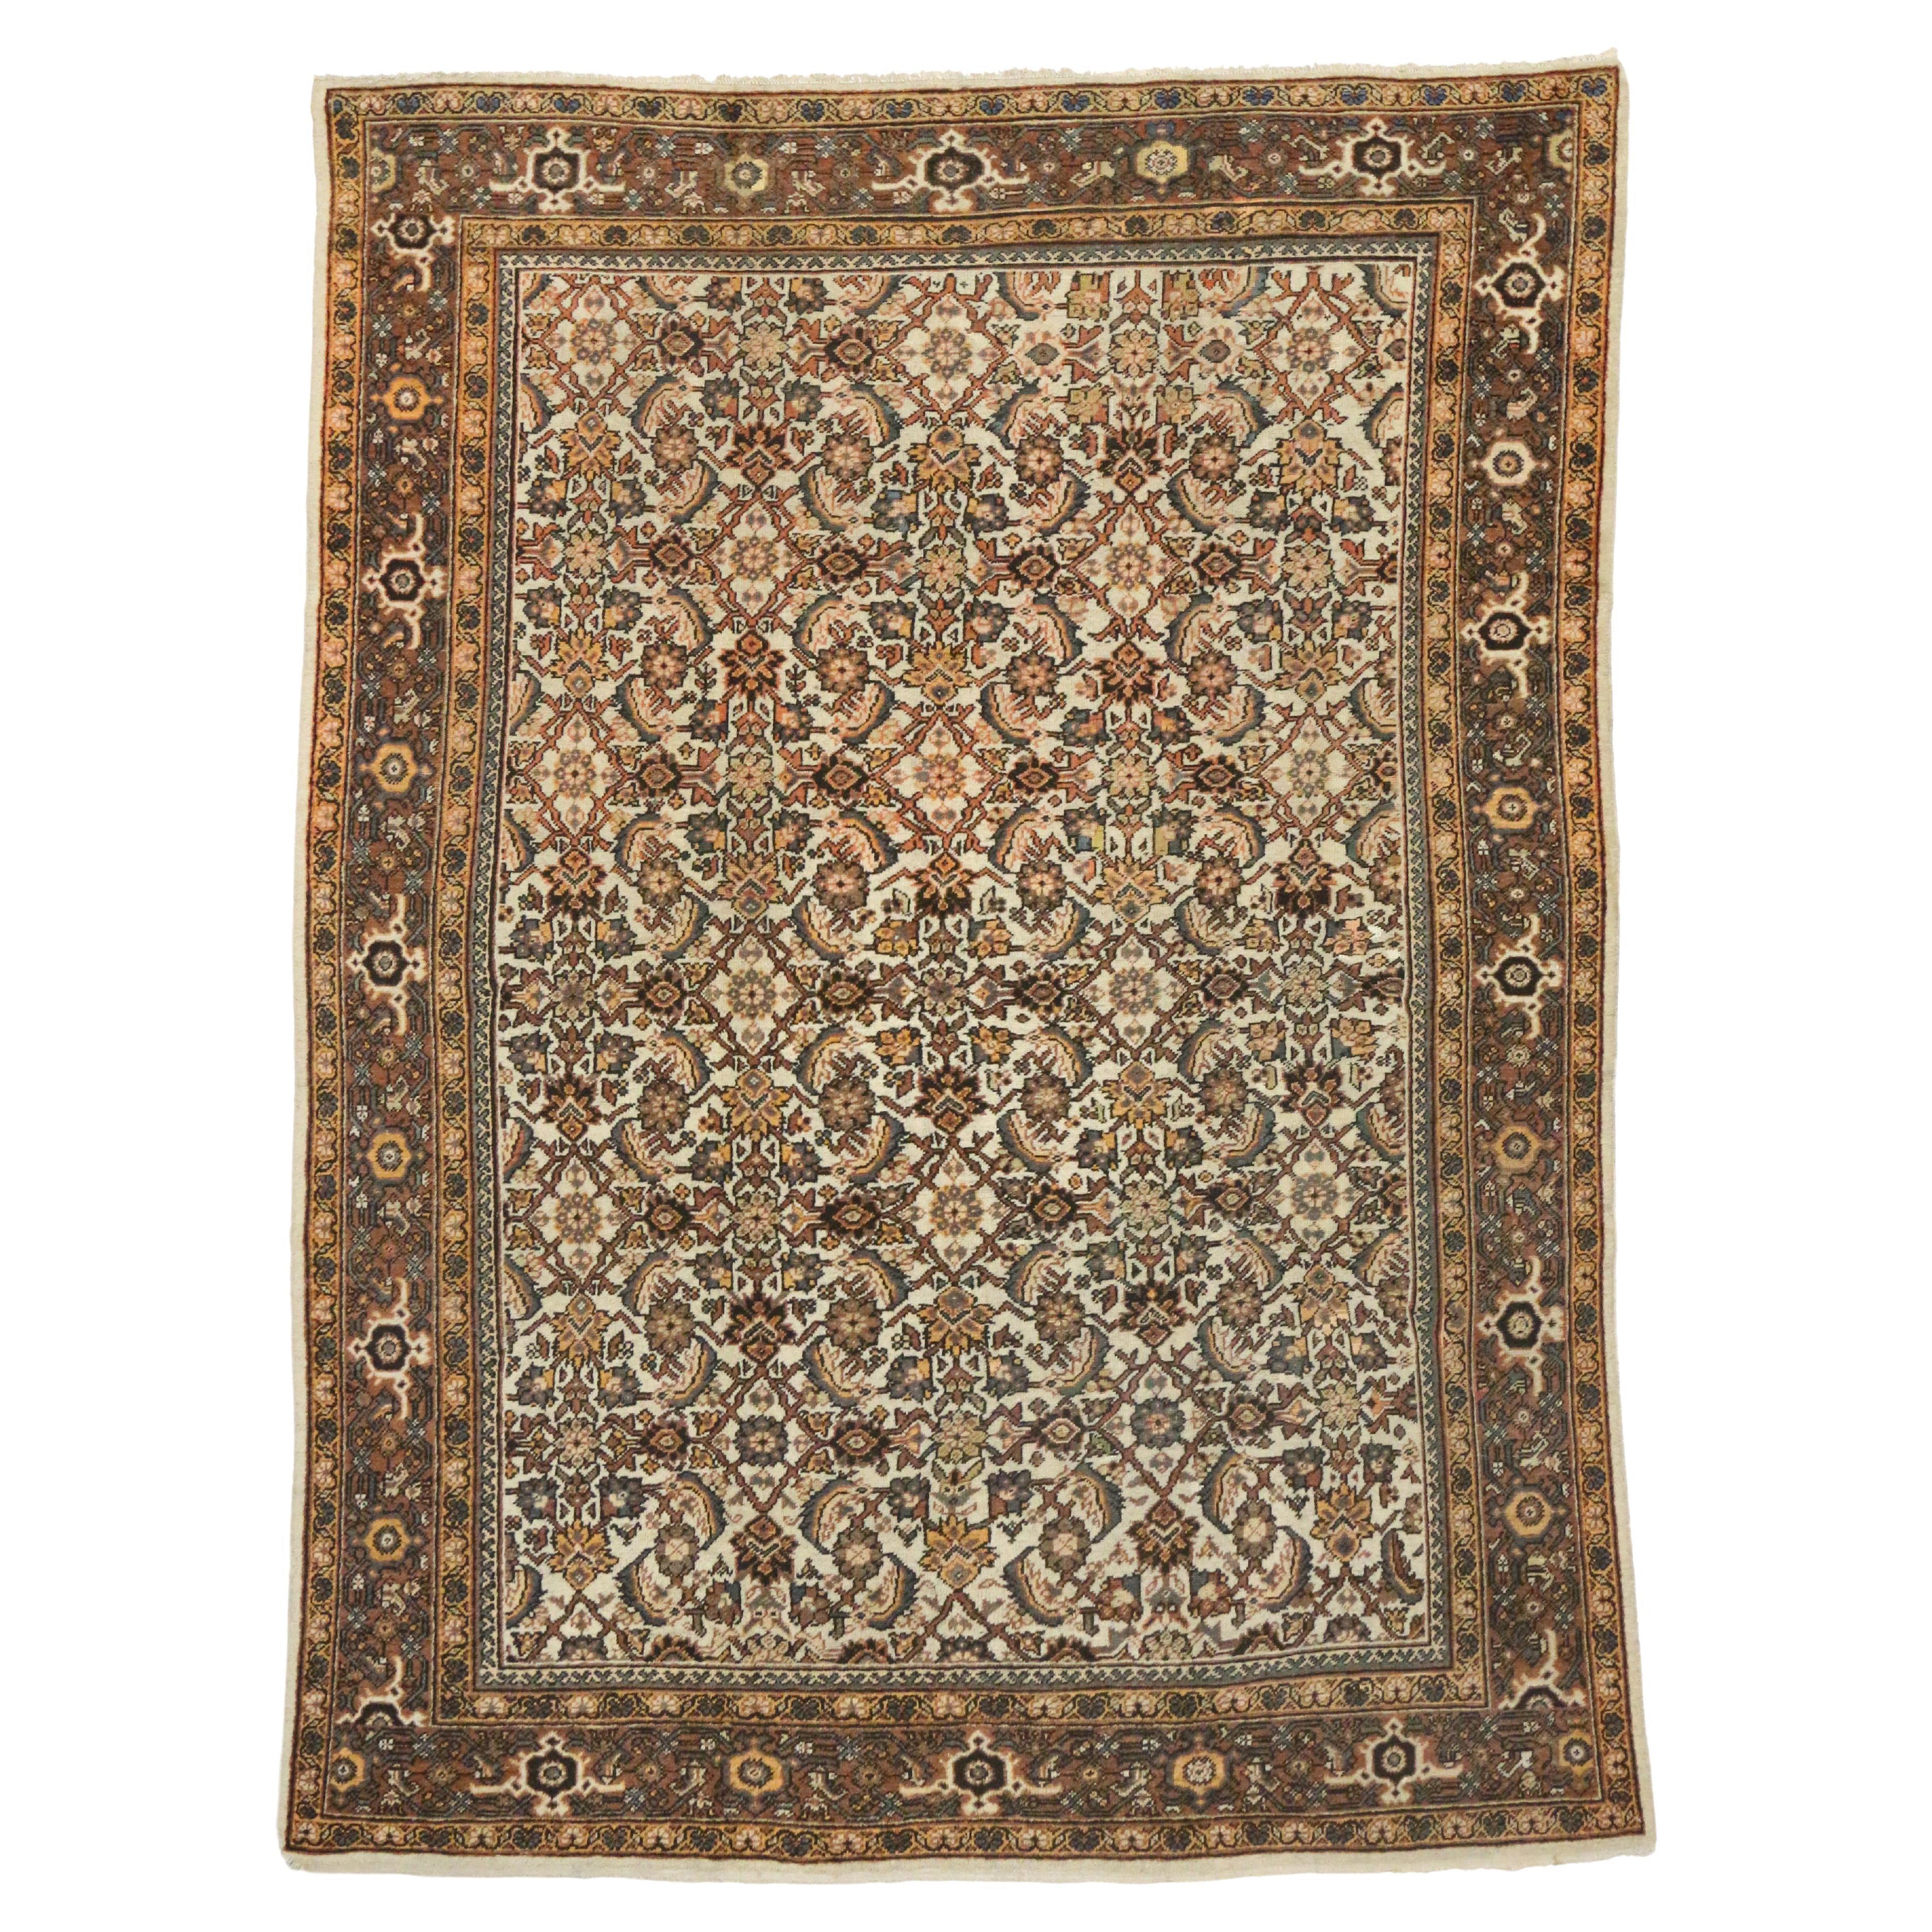 Antique Persian Mahal Rug with Herati Pattern and Rustic Arts & Crafts Style